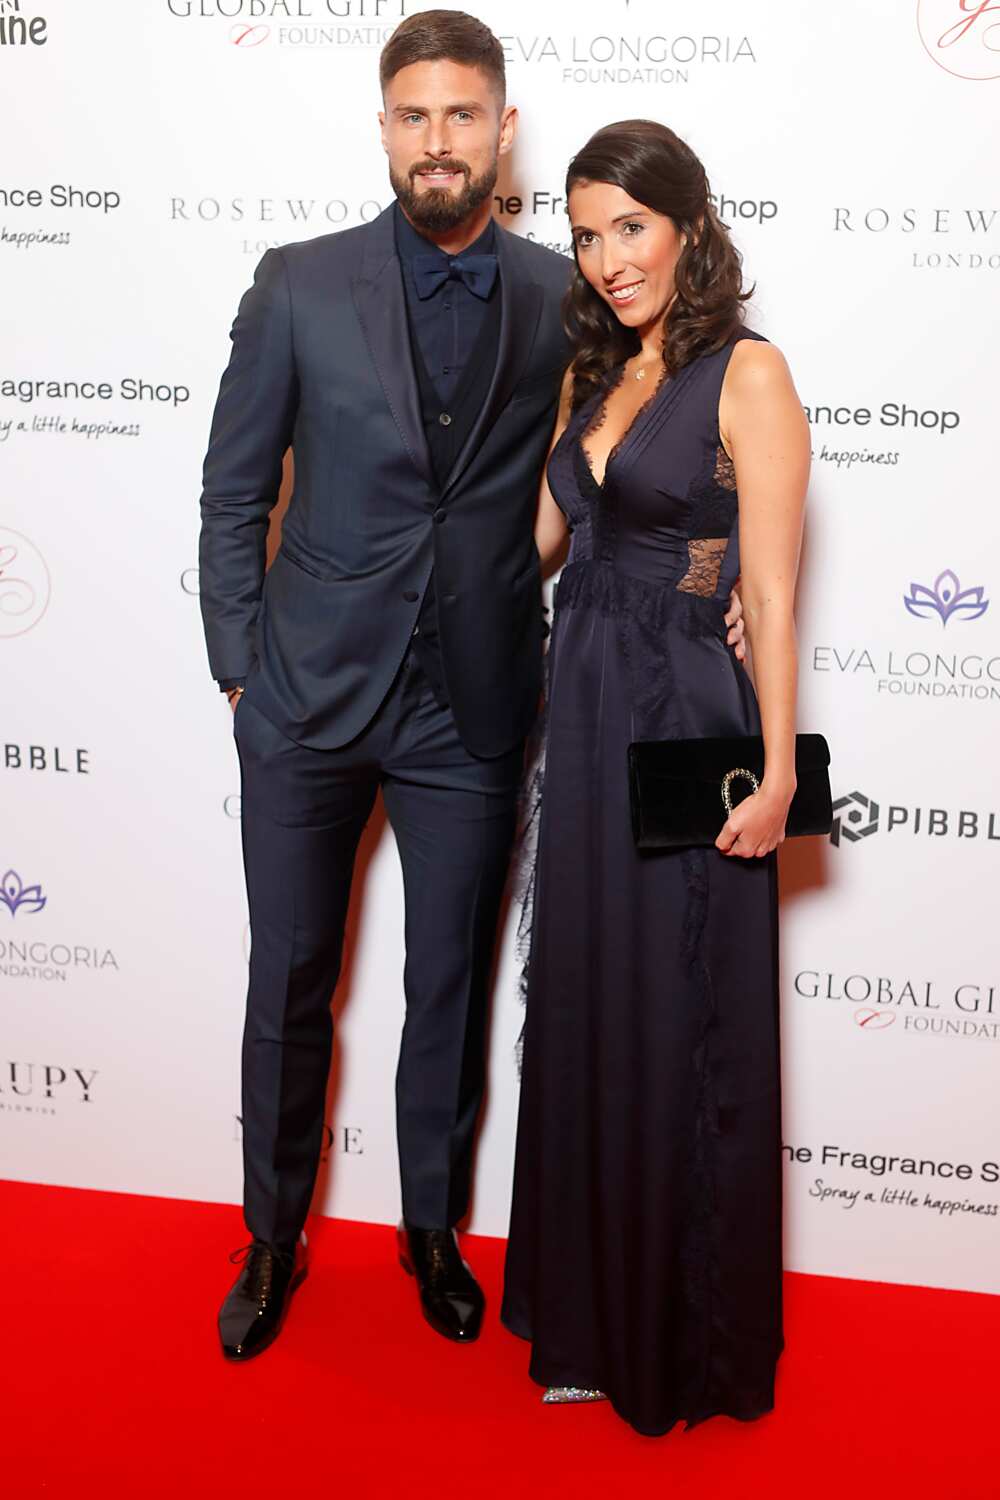 Olivier Giroud et sa femme
Photo by David Parry/PA Images via Getty Images